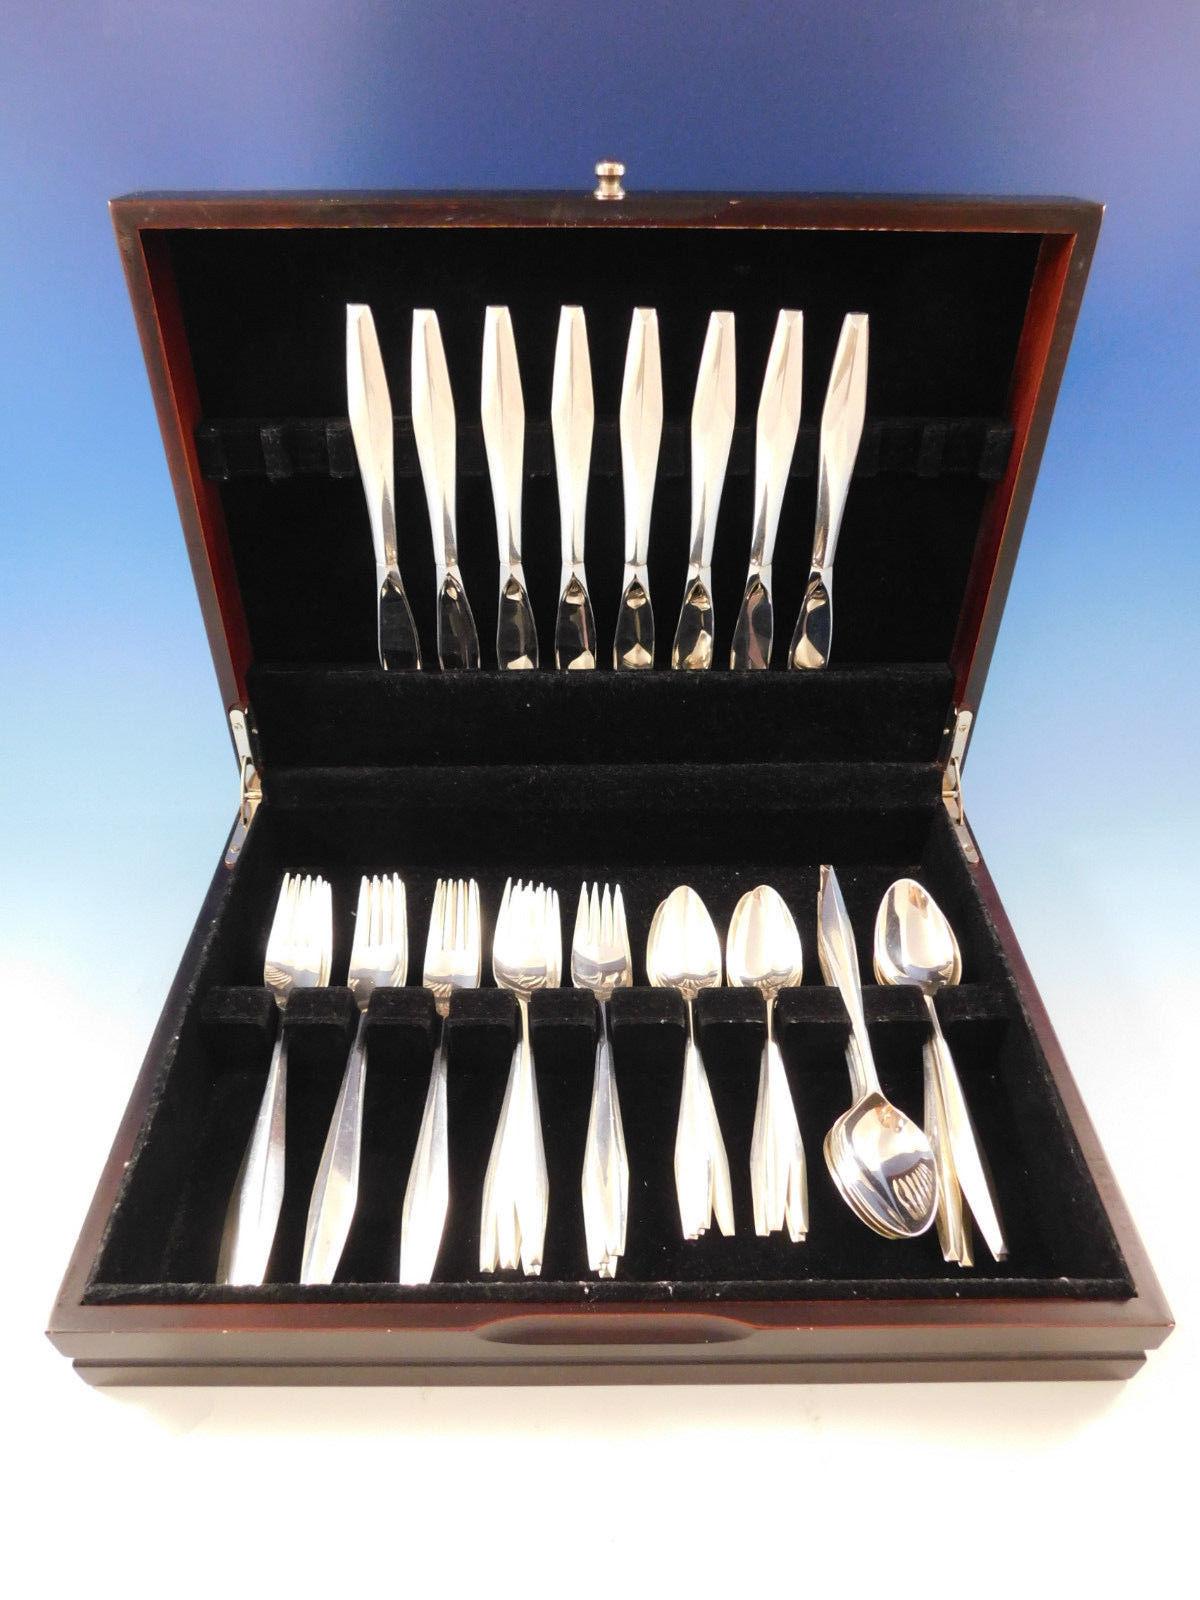 Diamond by Reed & Barton sterling silver flatware set, 40 pieces. This set includes:

Eight knives, 9